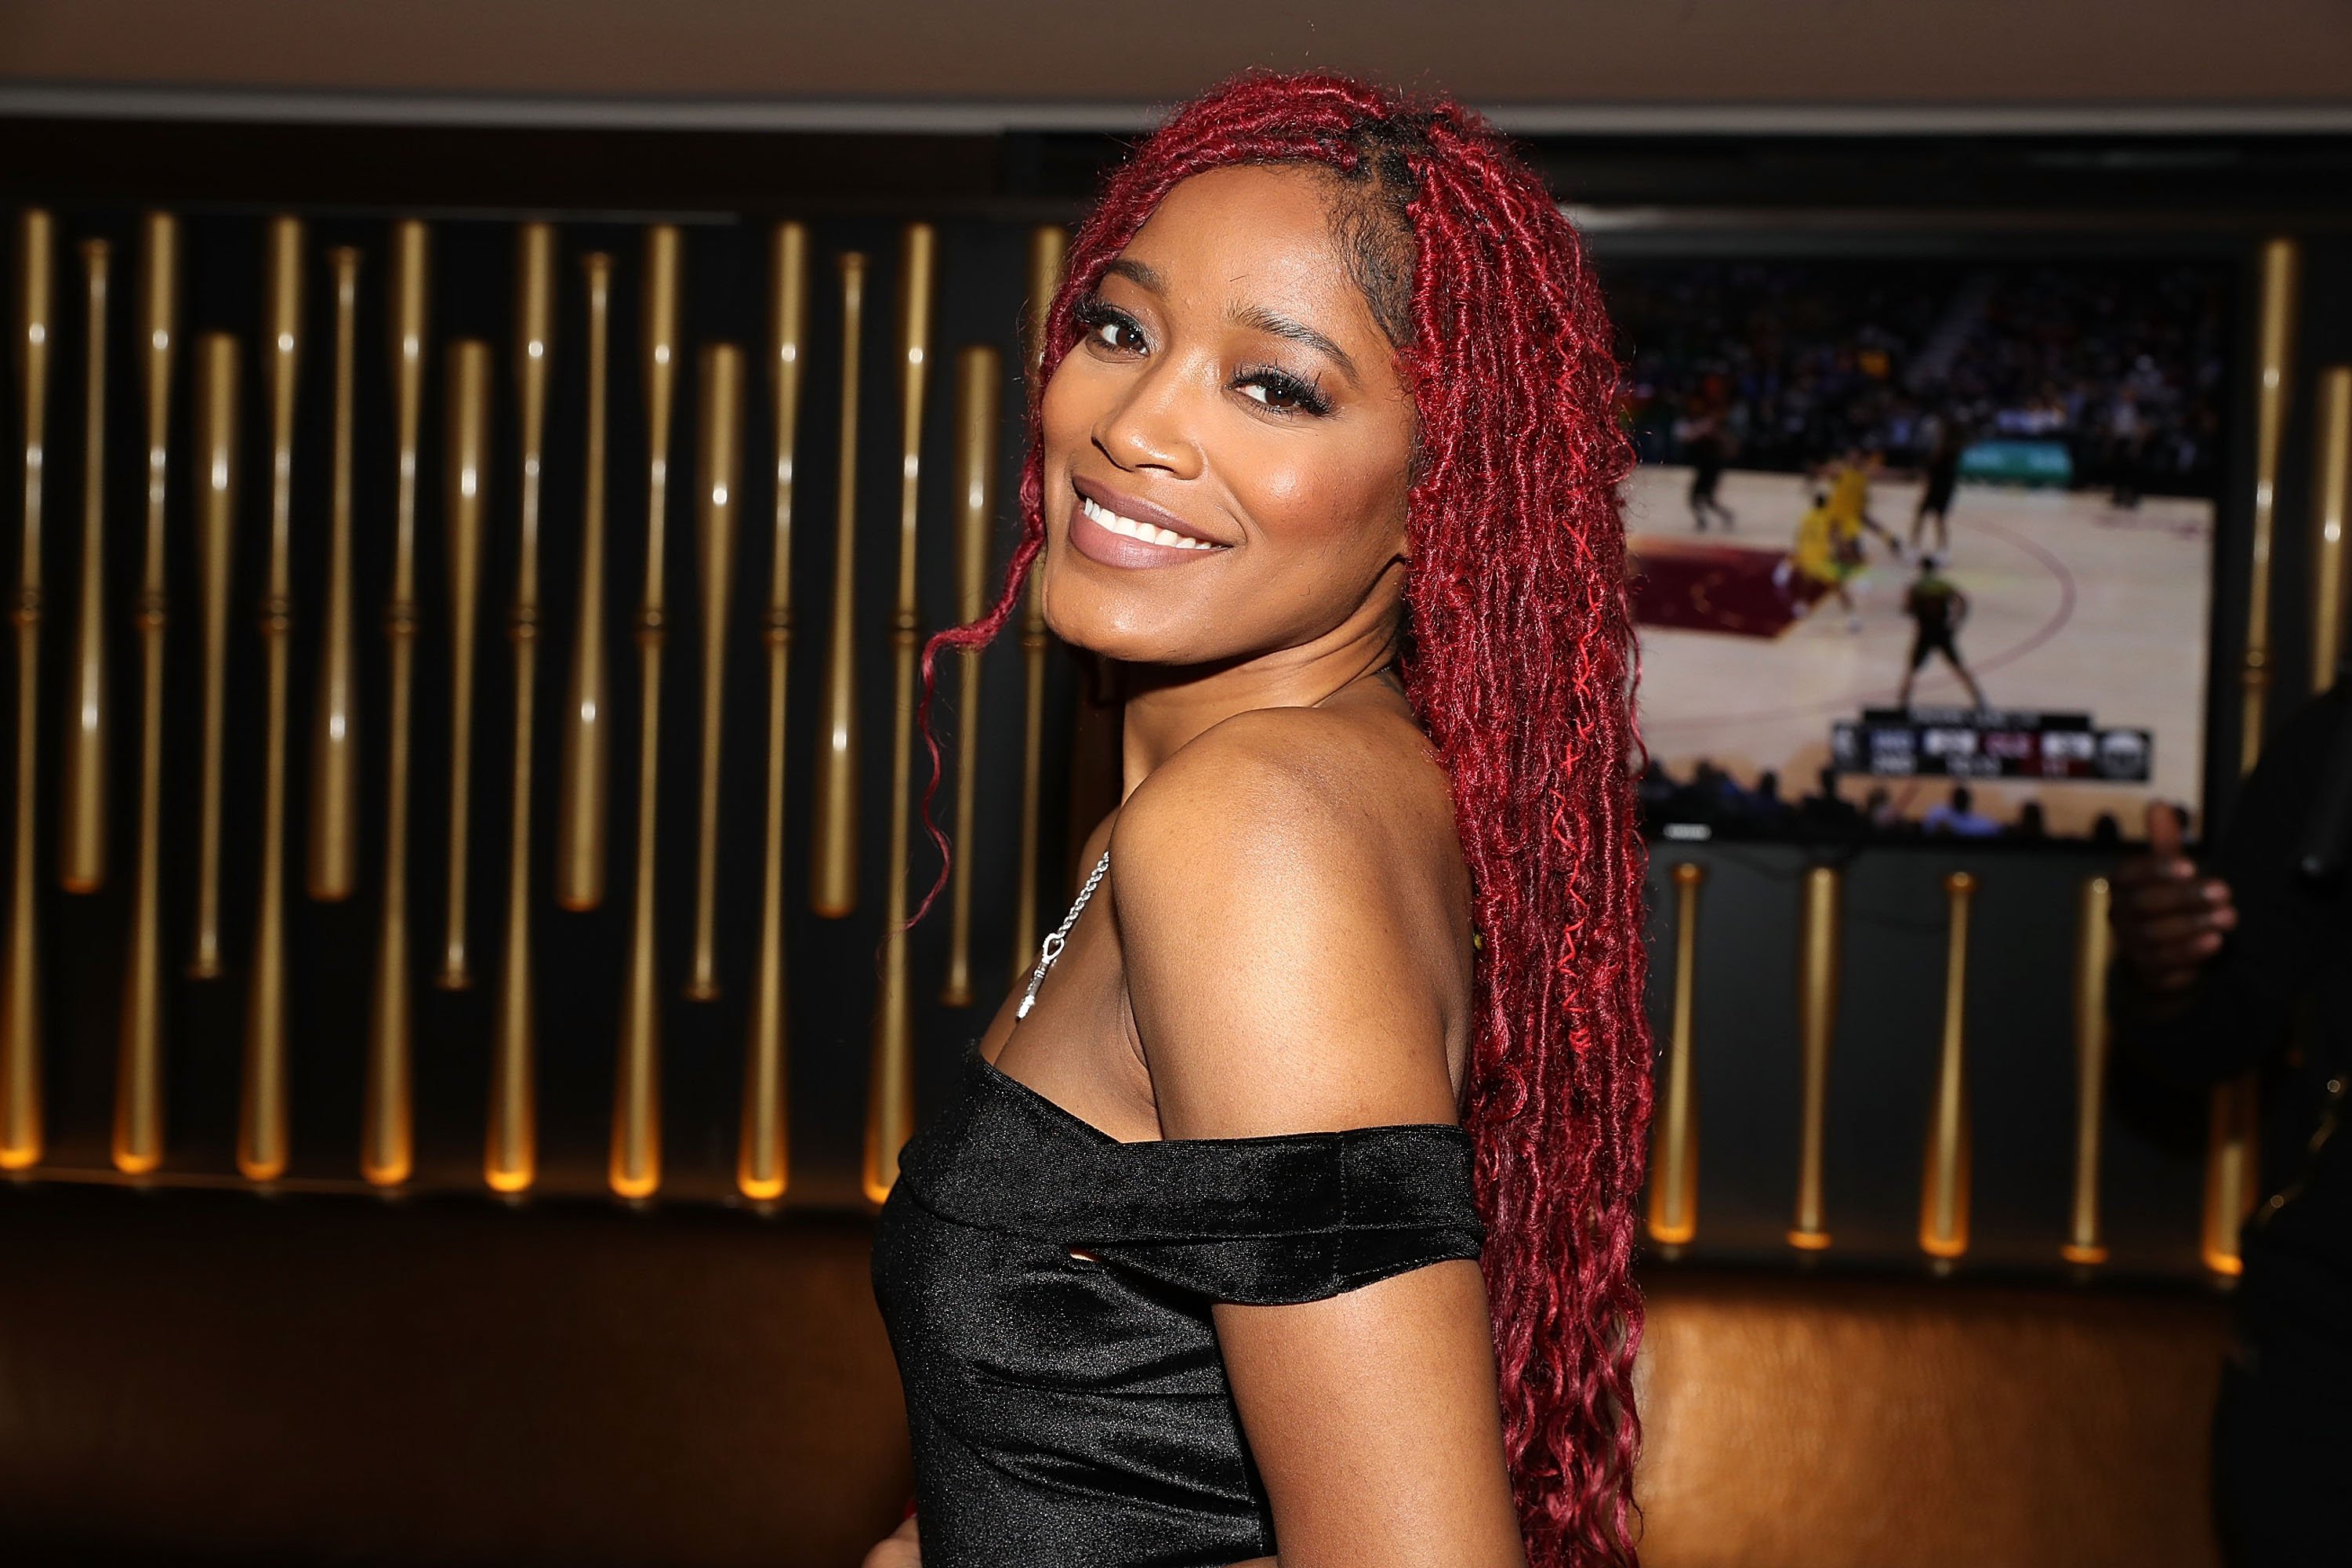 Keke Palmer at her listening party at 40 / 40 Club on April 18, 2018 in New York City. | Source: Getty Images